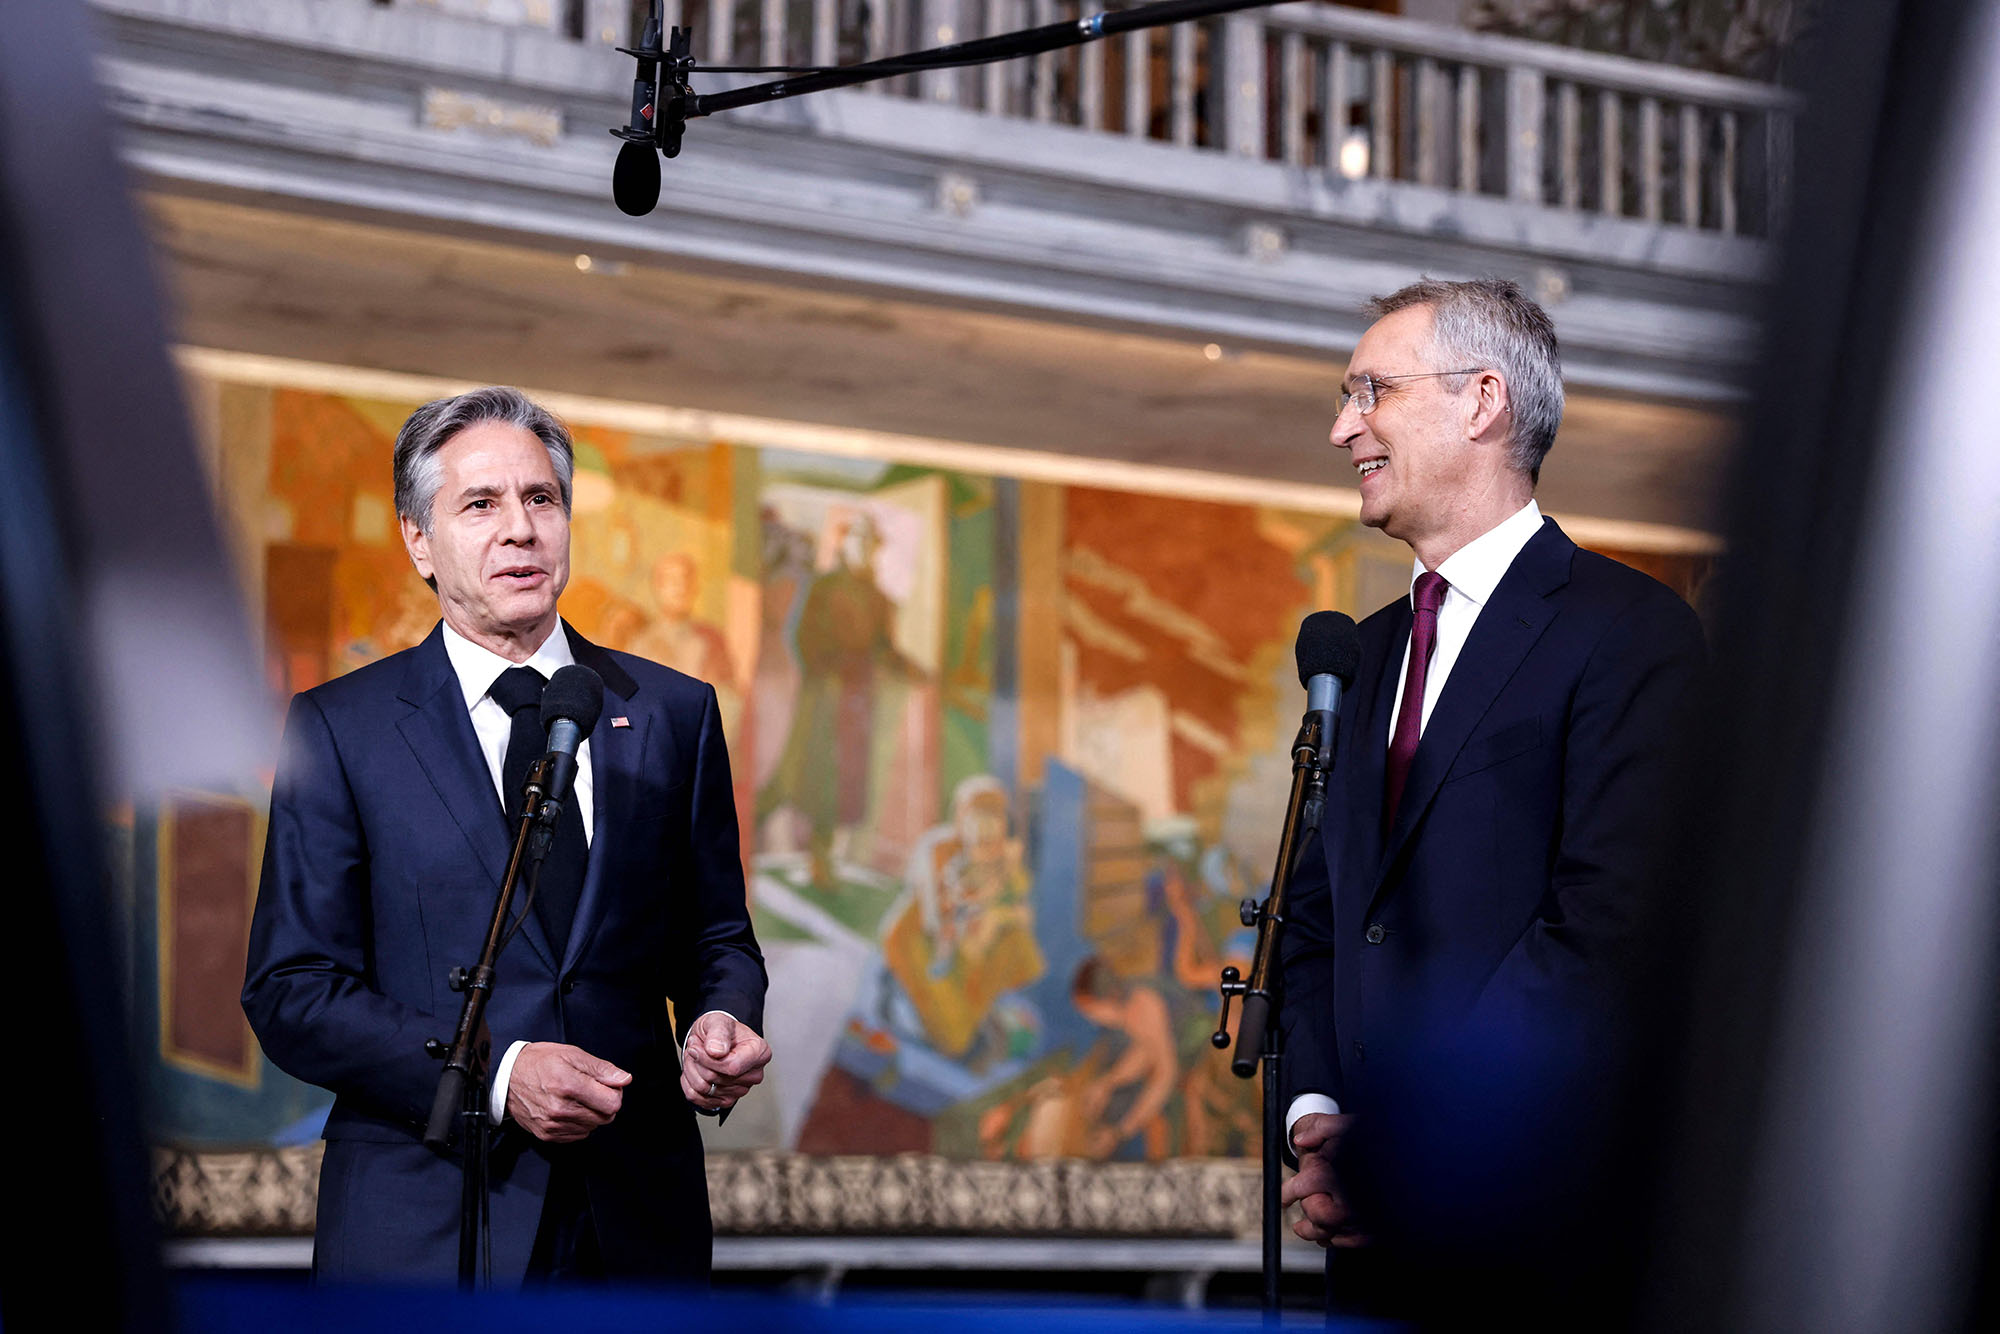 US Secretary of State Antony Blinken, left, and NATO Secretary General Jens Stoltenberg give a doorstep statement during an informal meeting of NATO Foreign Affairs Ministers at The Oslo City Hall in Oslo, Norway on June 1.